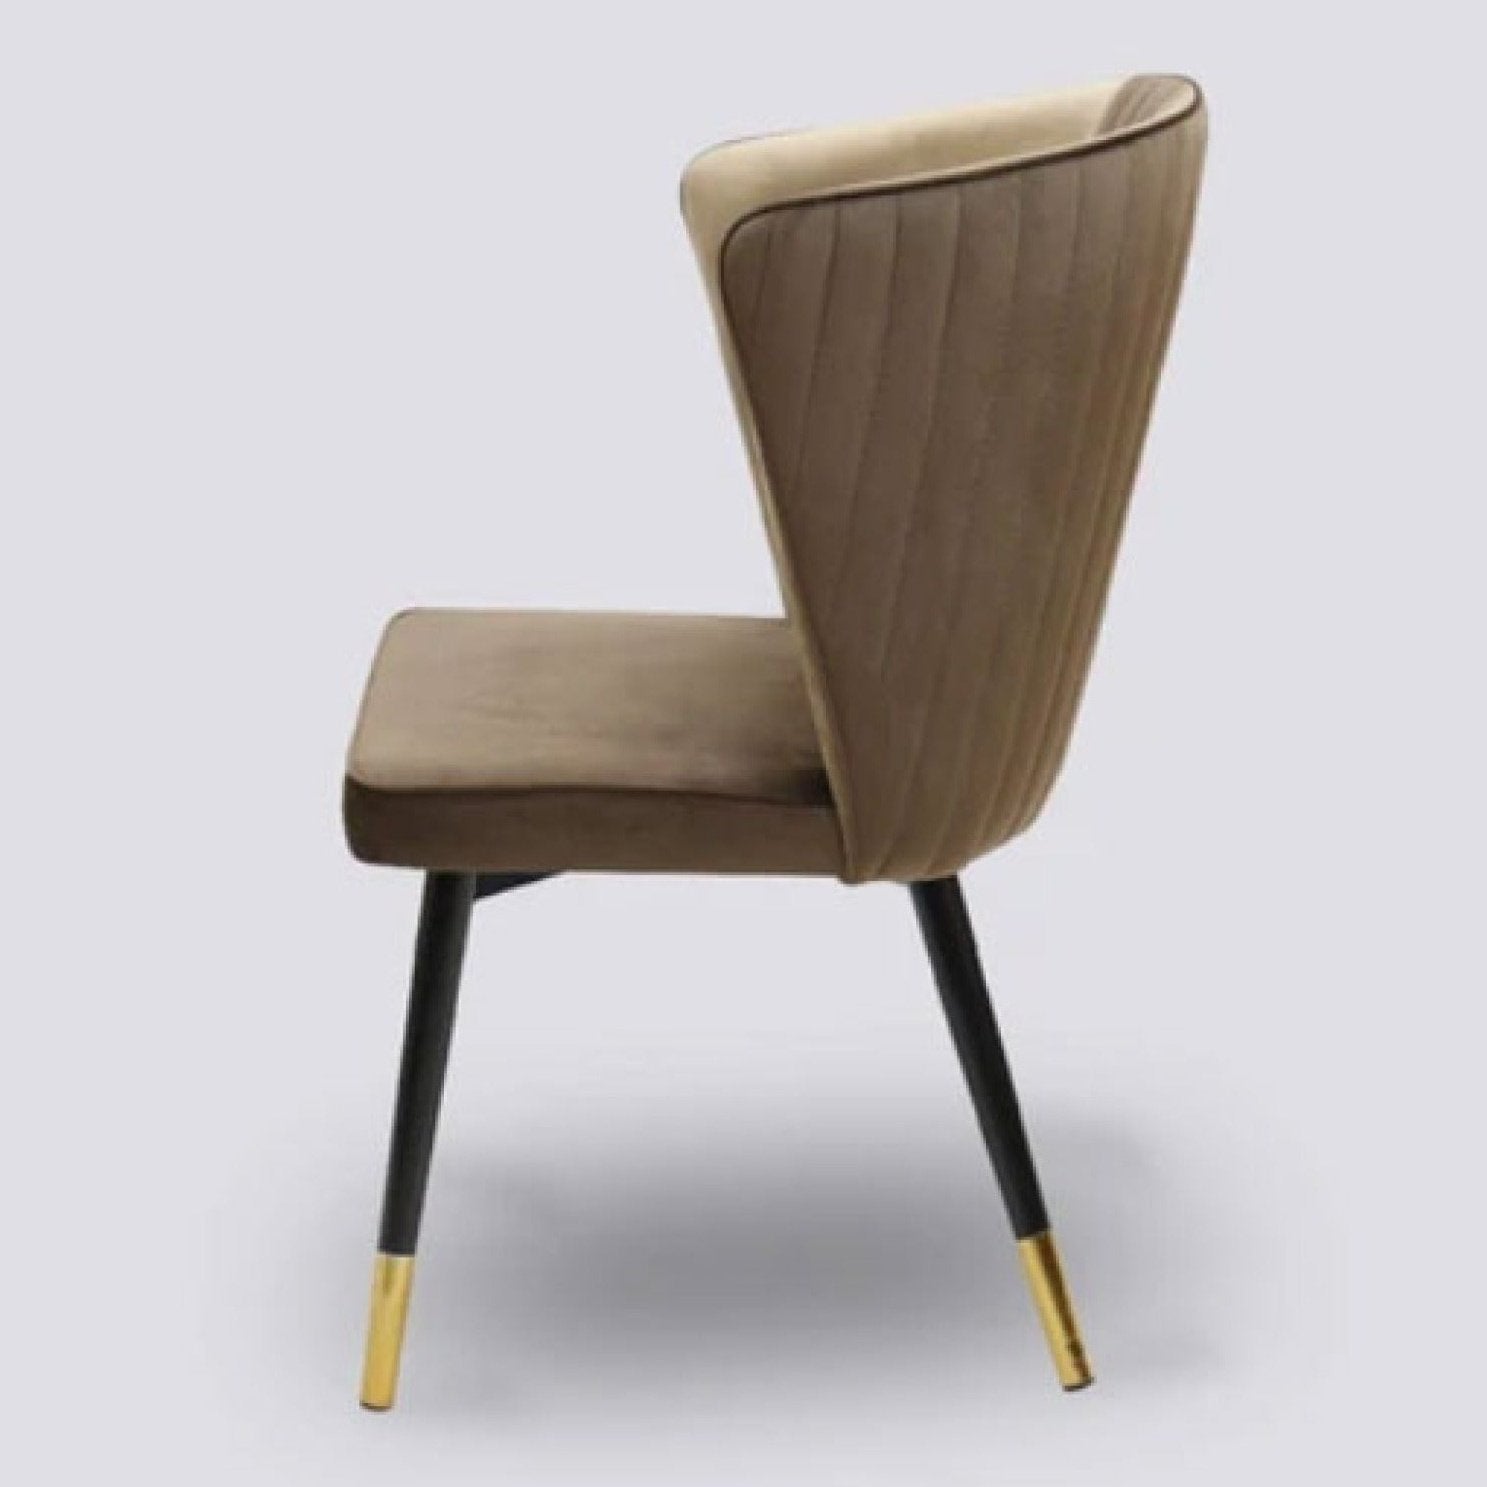 LUX-490 WRAP DINING CHAIR MoBEL Furniture